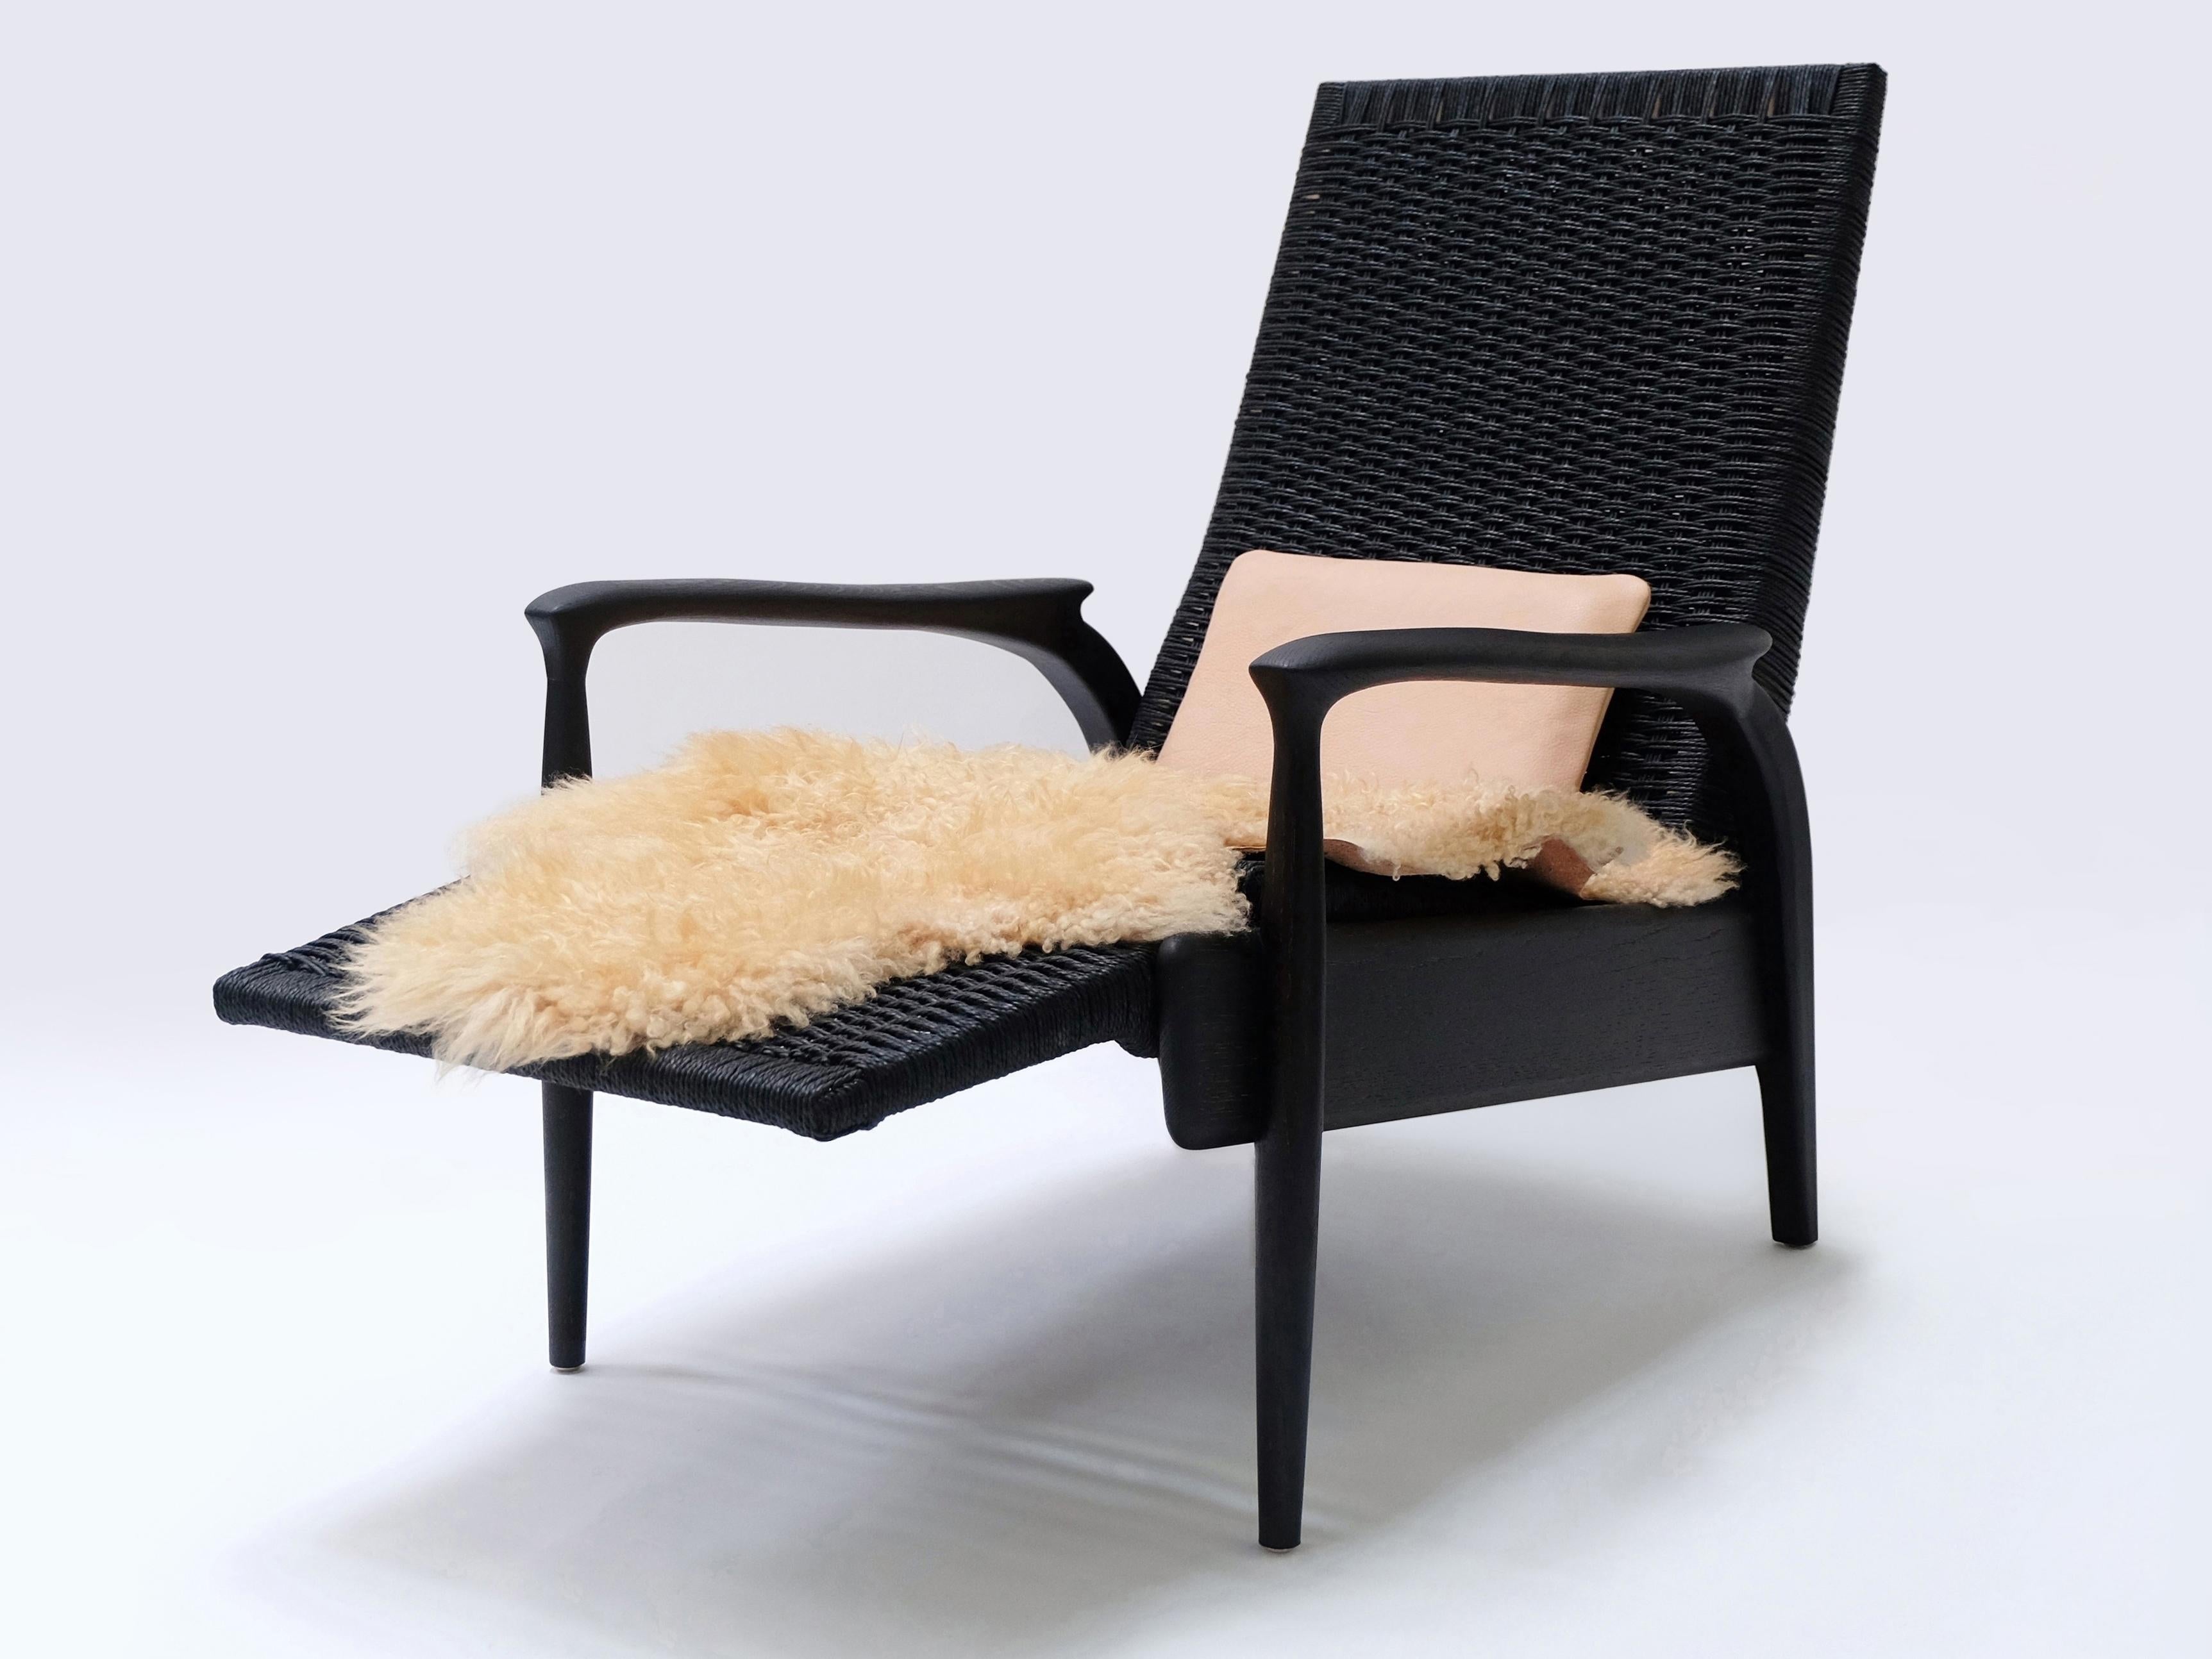 Reclining Lounge Chair in Blackened Oak& Black Danish Cord with Leather Cushions In New Condition For Sale In London, GB